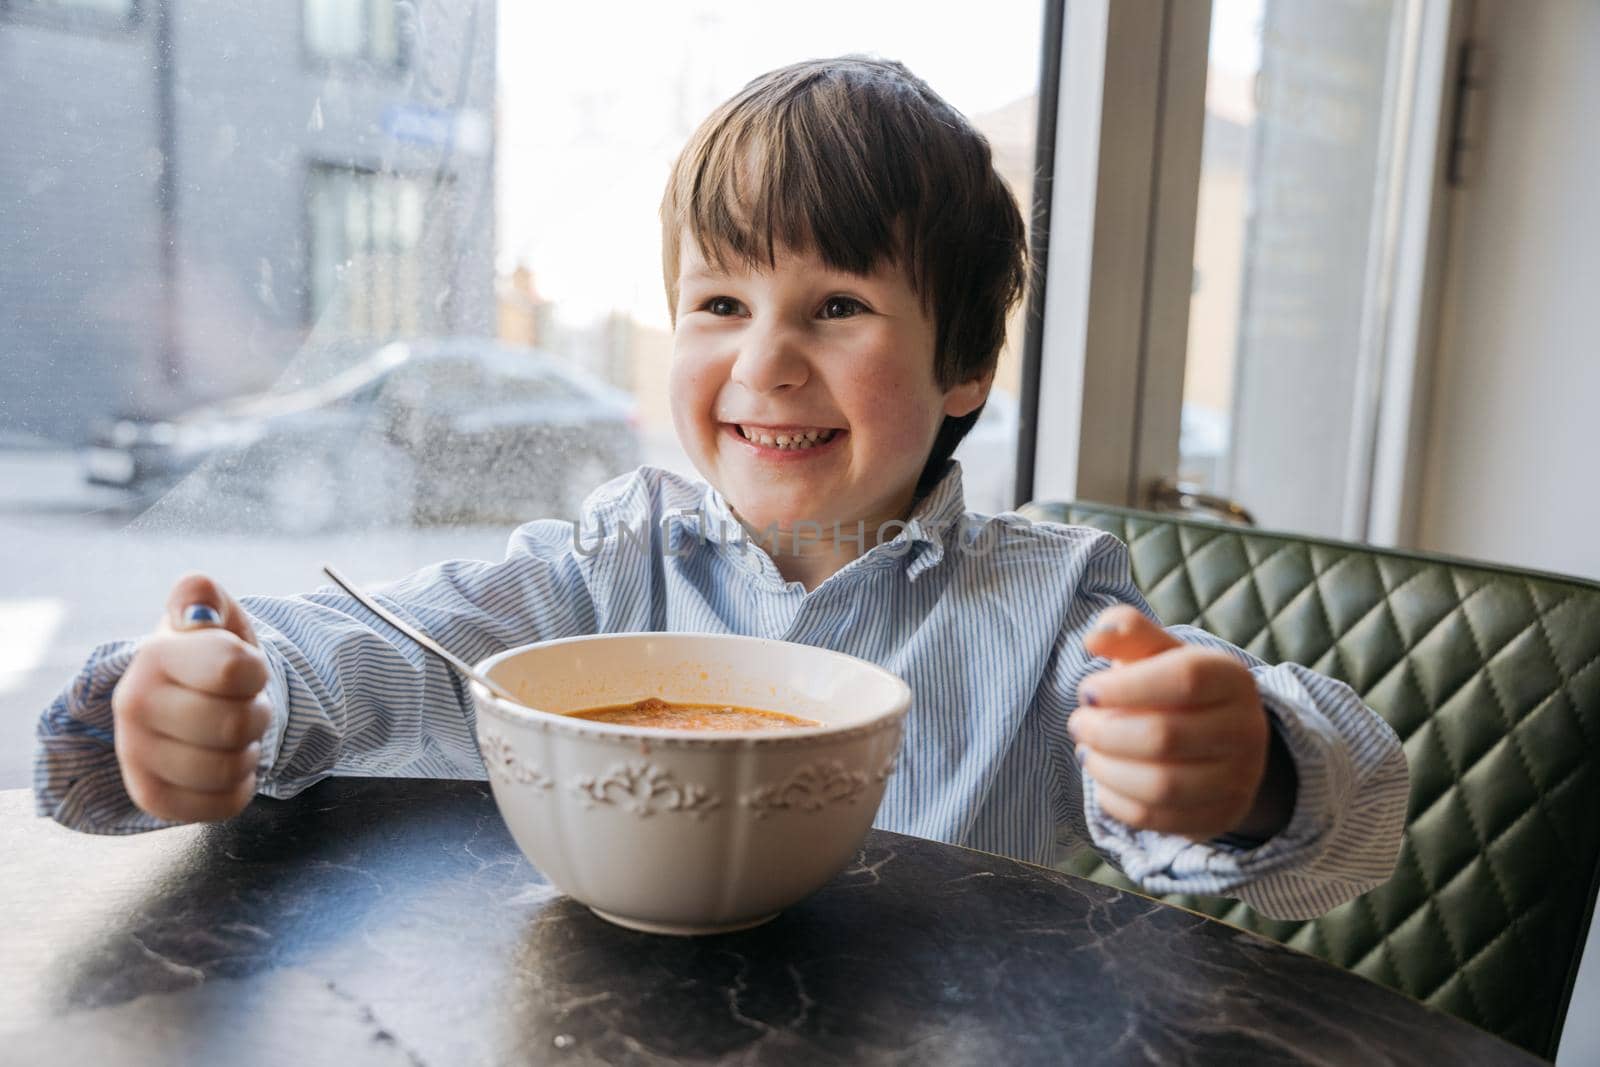 Boy sitting at the cafe with a big bowl of soup and laughing by Varaksina